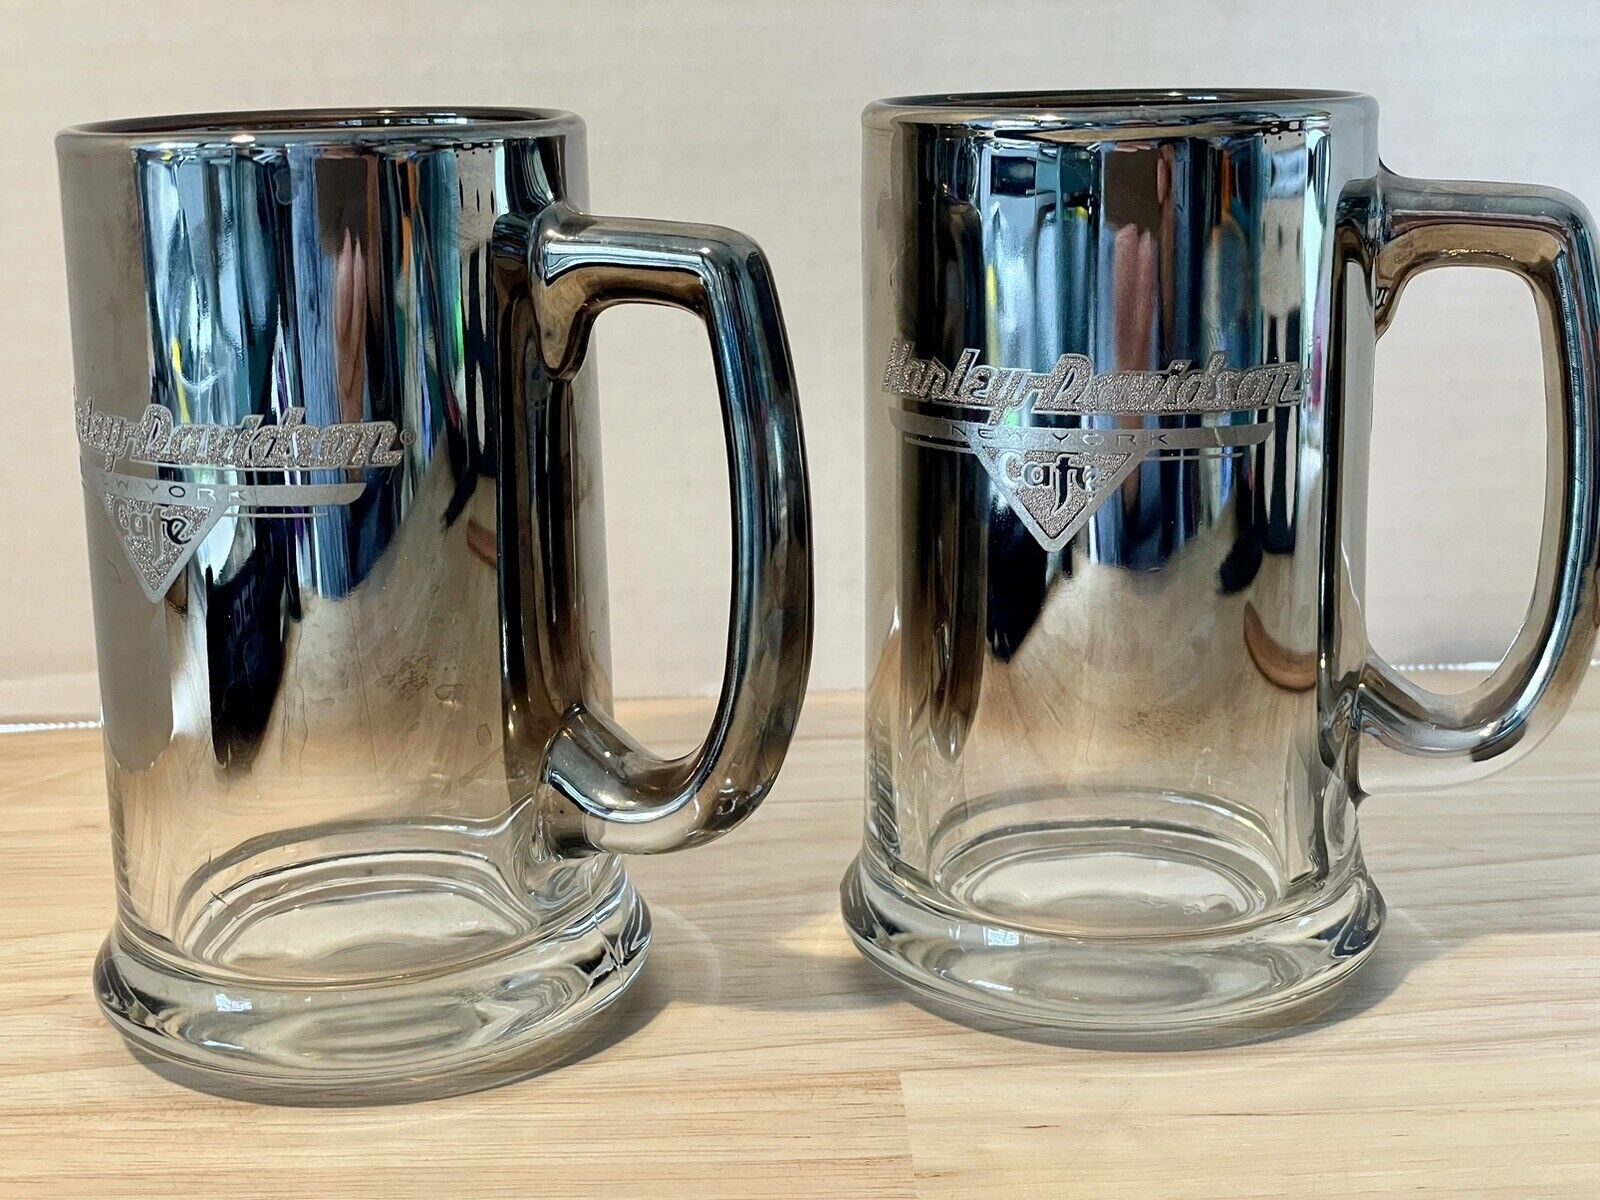 HARLEY DAVIDSON New York Cafe ETCHED CHROME Mirrored Silver Glass Mug (pair)